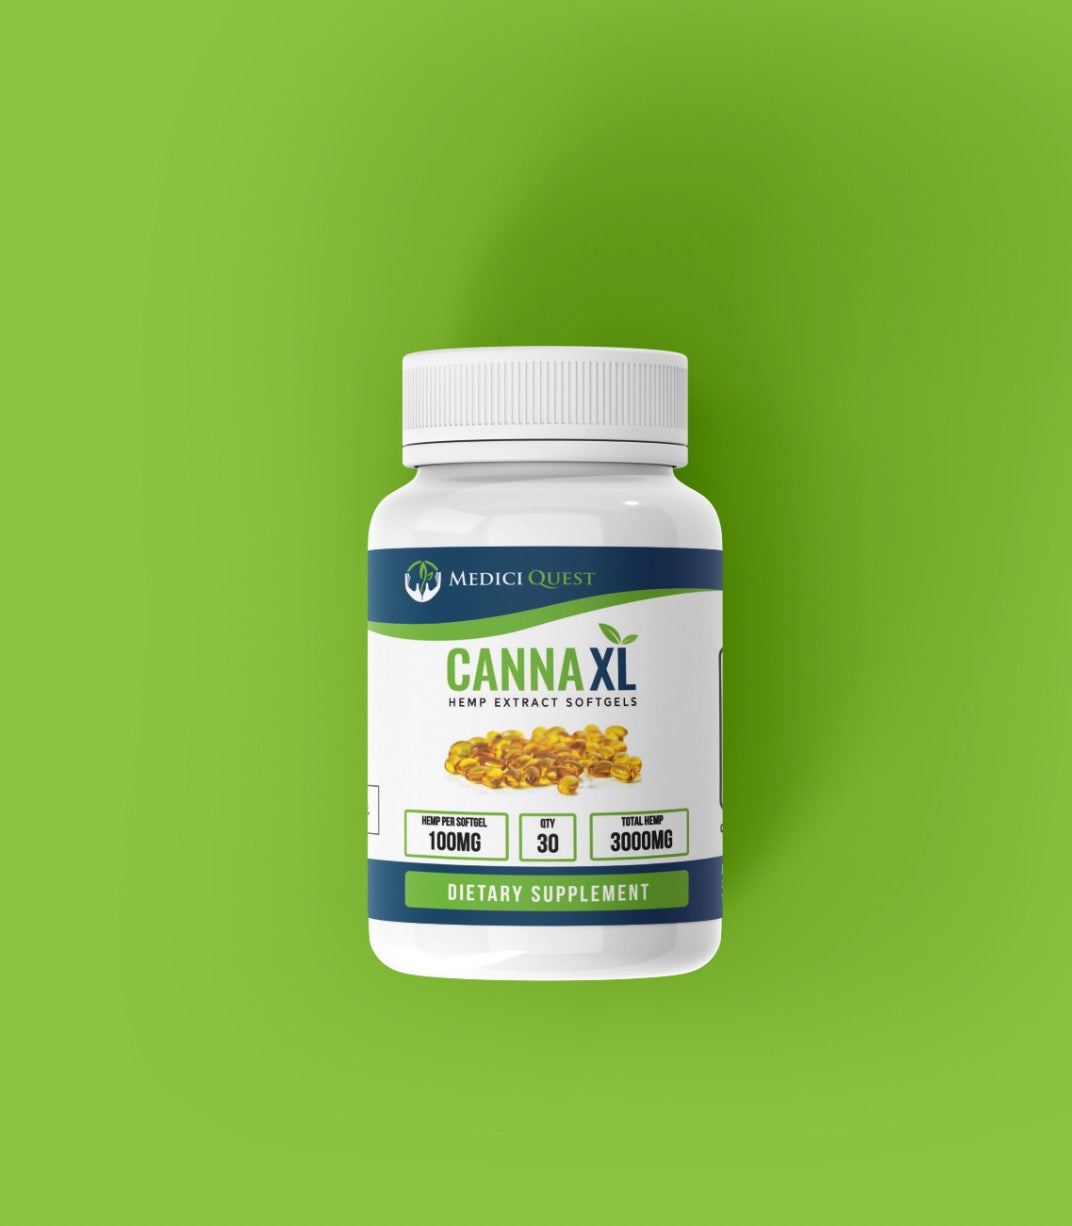 CannaXL Softgels beautifully displayed on their brand's vibrant green backdrop.